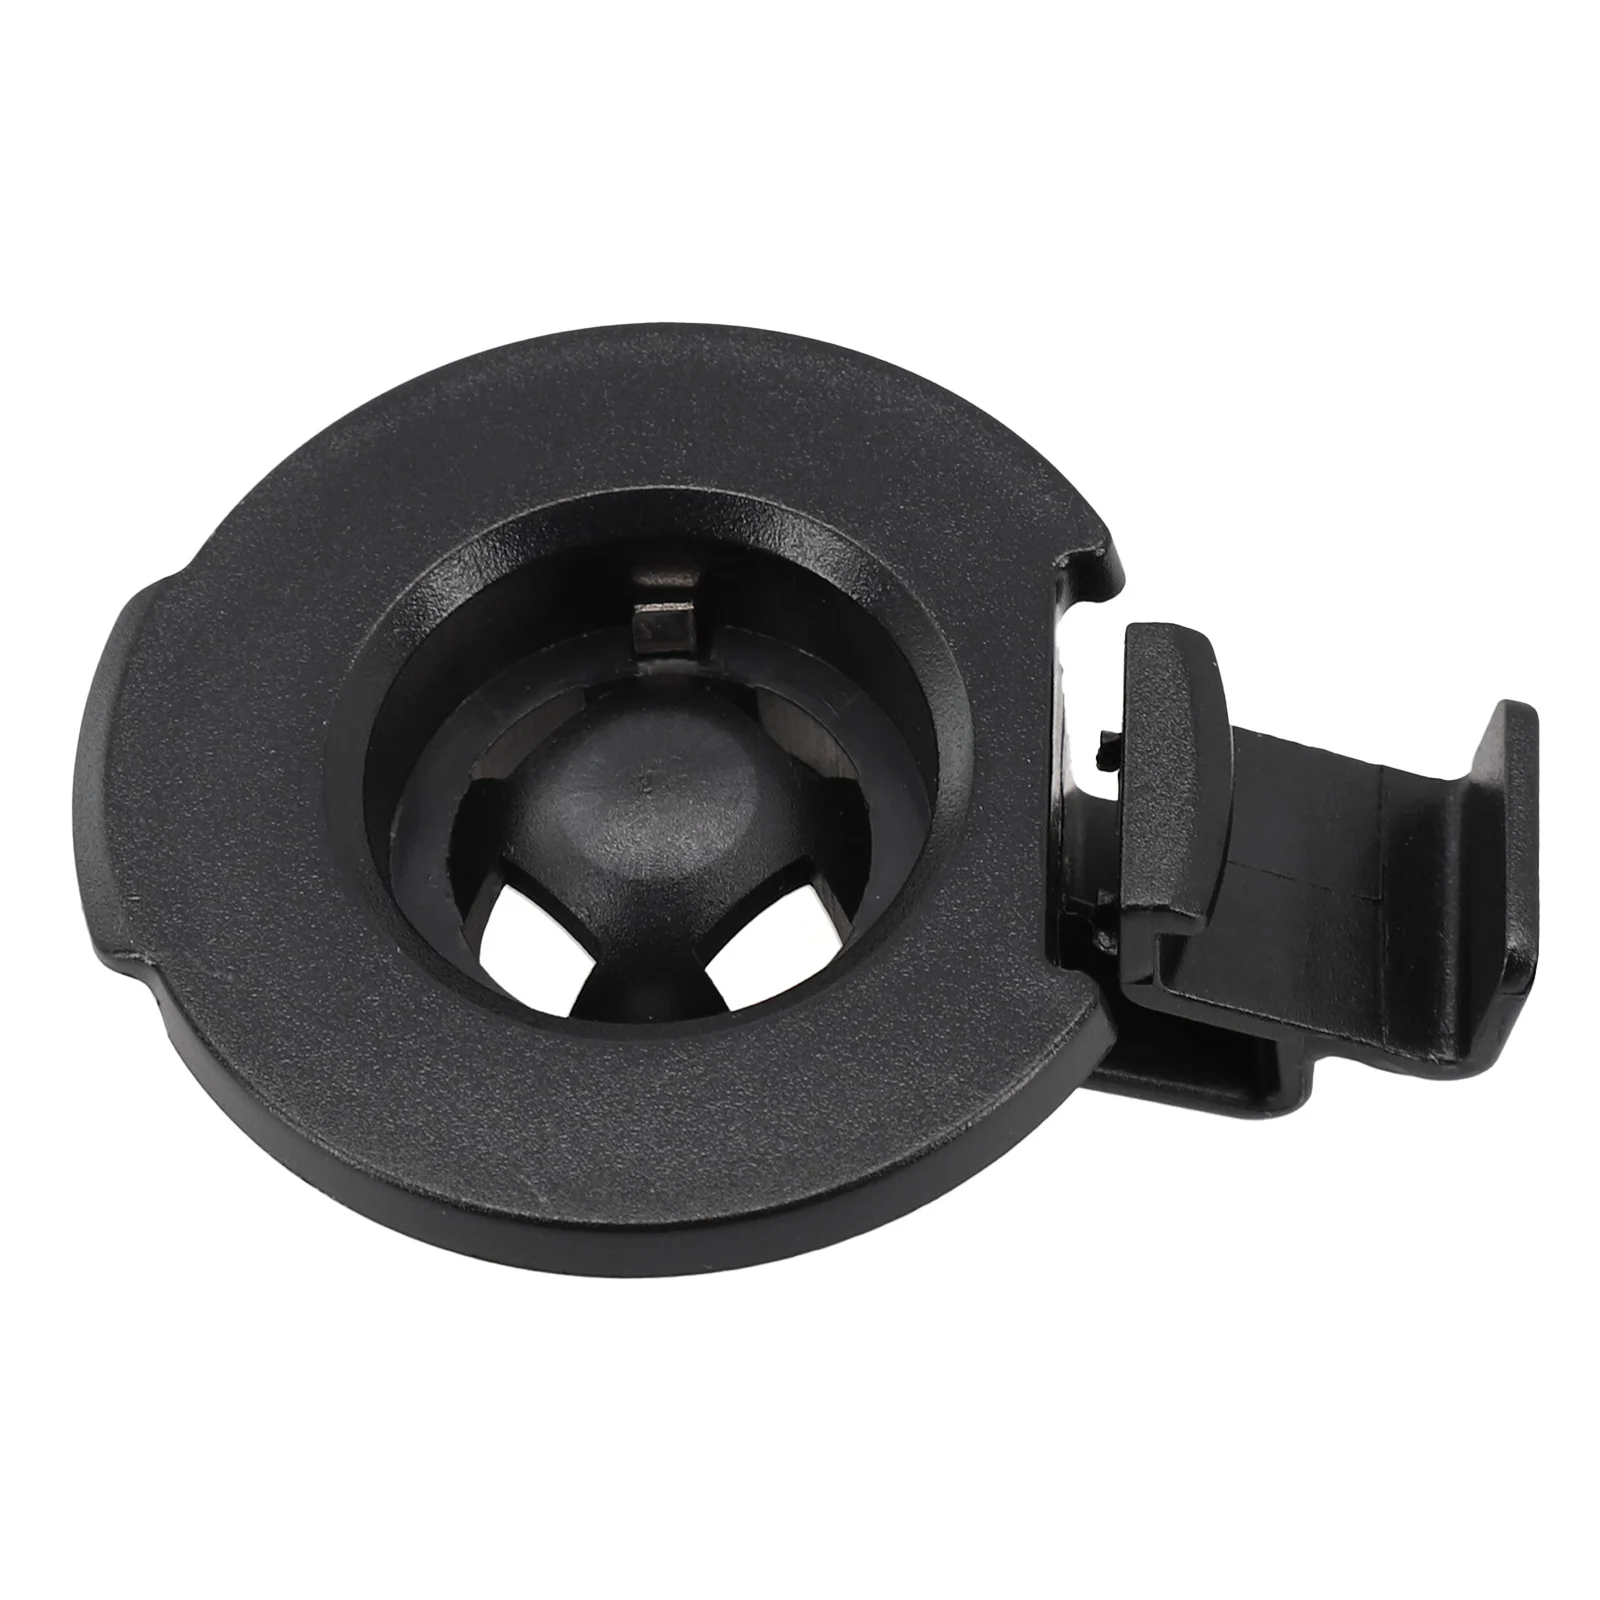 

GPS Back Bracket Part Replacement Accessories 1 Pcs High Quality Mount Holder For GARMIN NUVI 55 55LM Protable